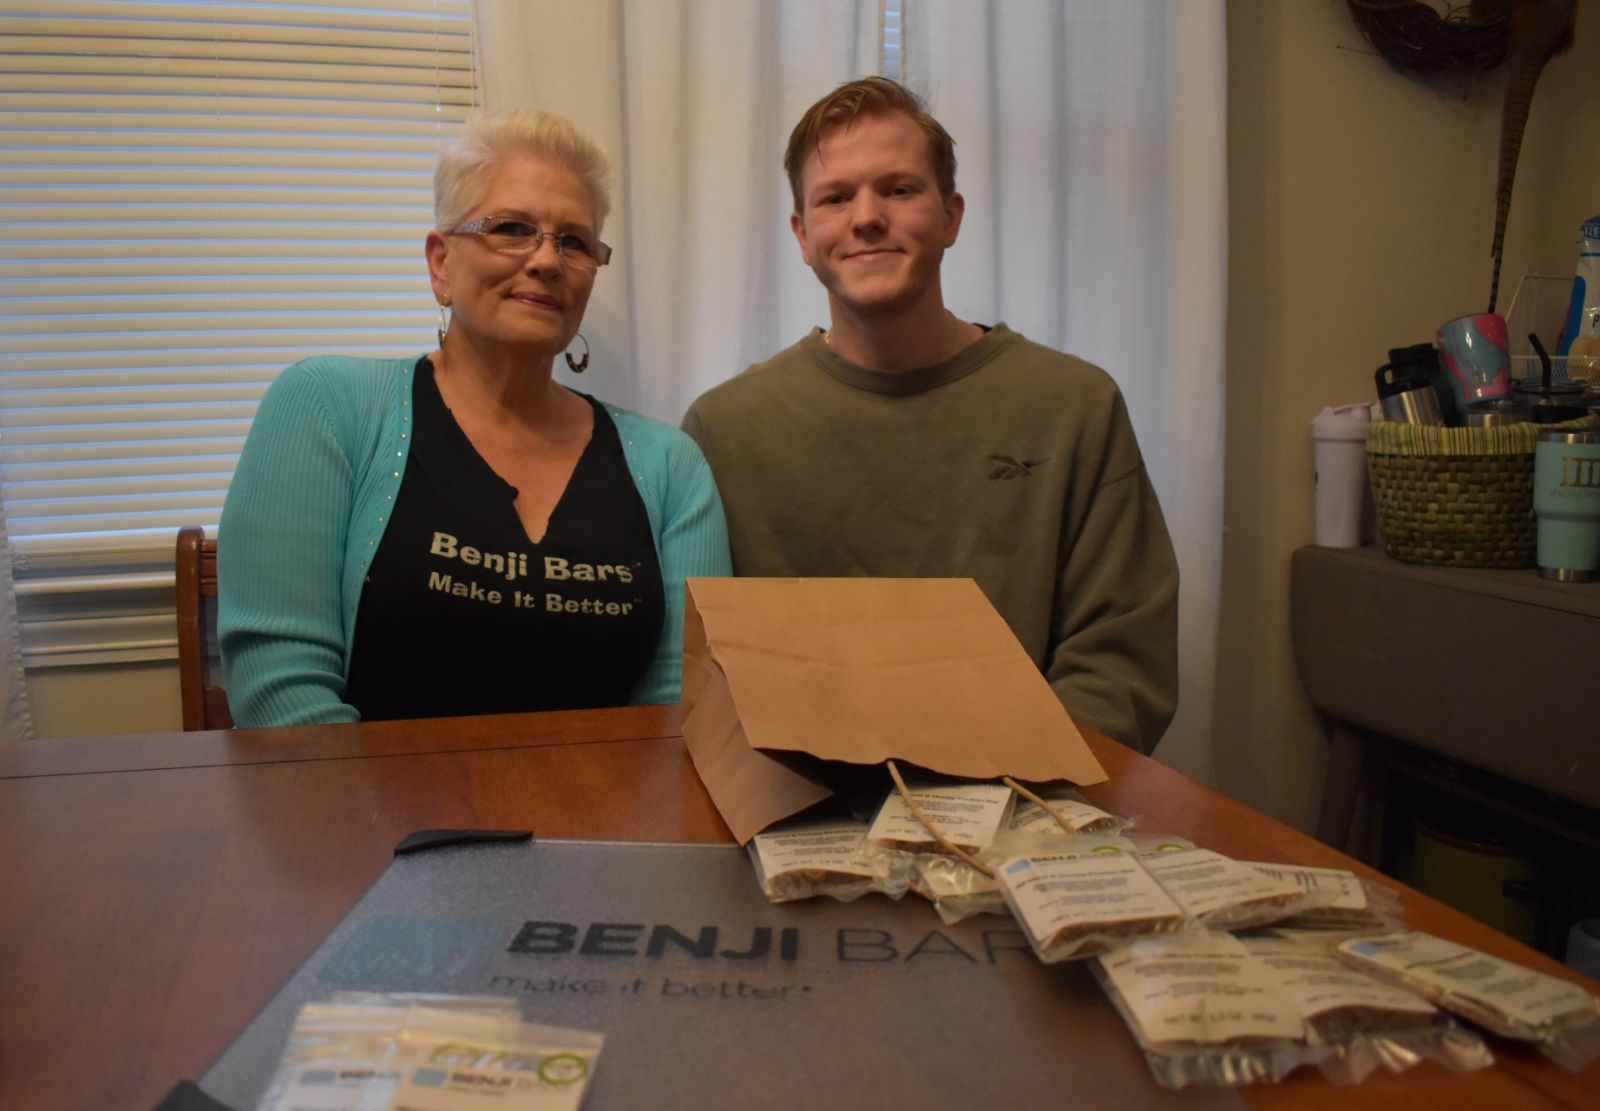 Julie and Benji Maddox pose with a few of her bars, which she took off her website marketplace and out retail stores in the period of trademark uncertainty following her realization that she had sent her renewal payments to a fraudster instead of the U.S. Patent and Trademark Office. (Photo/Molly Hulsey)